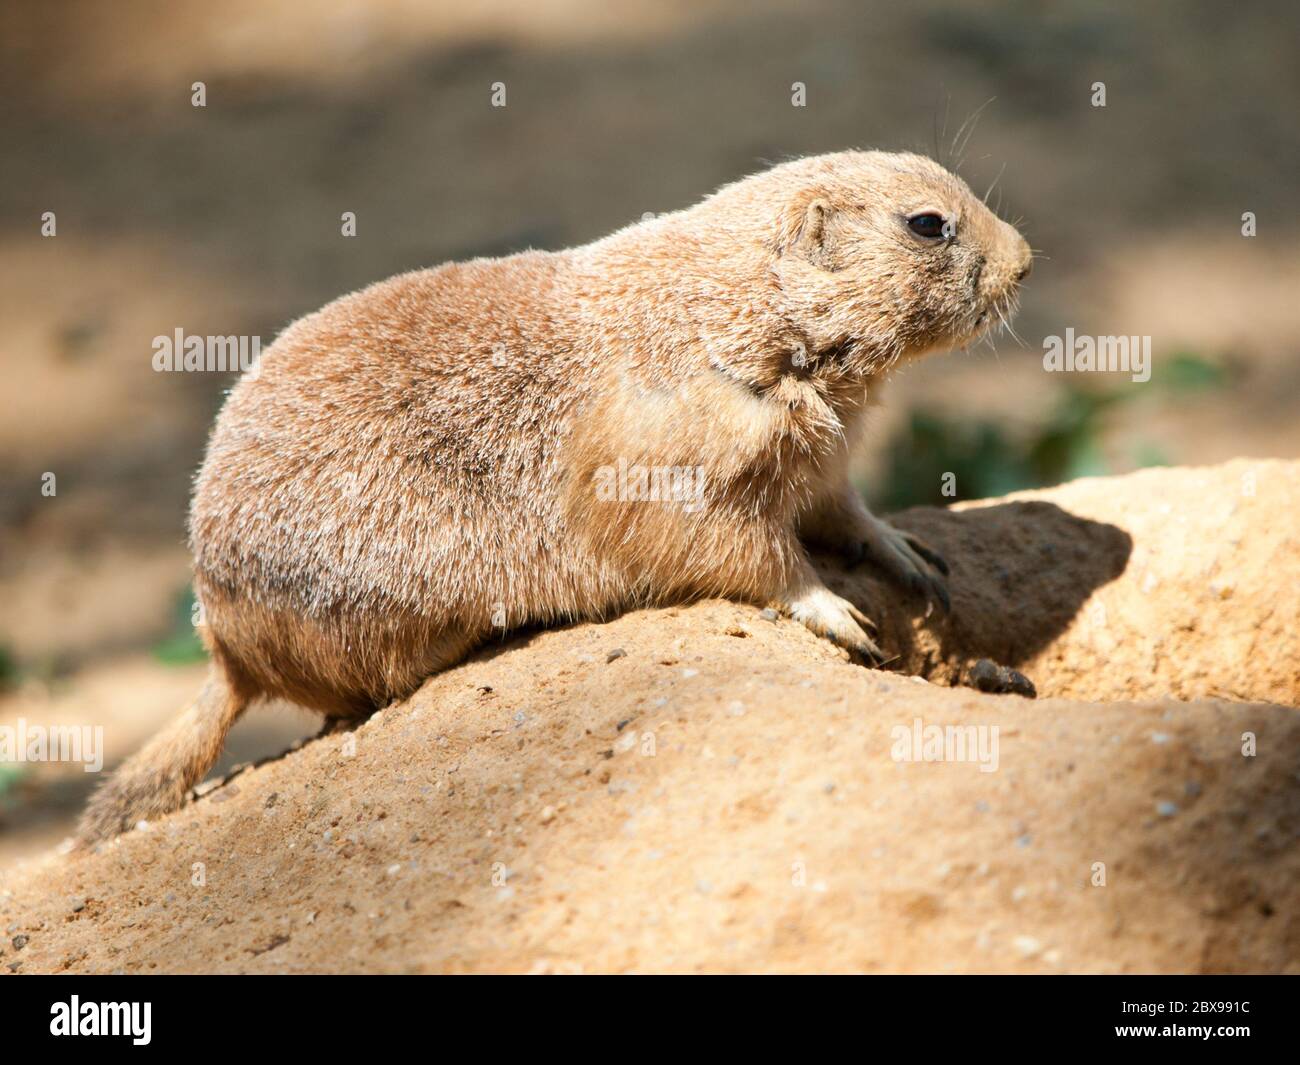 Prairie dog rodent on a dry dusty ground. USA, North America. Stock Photo